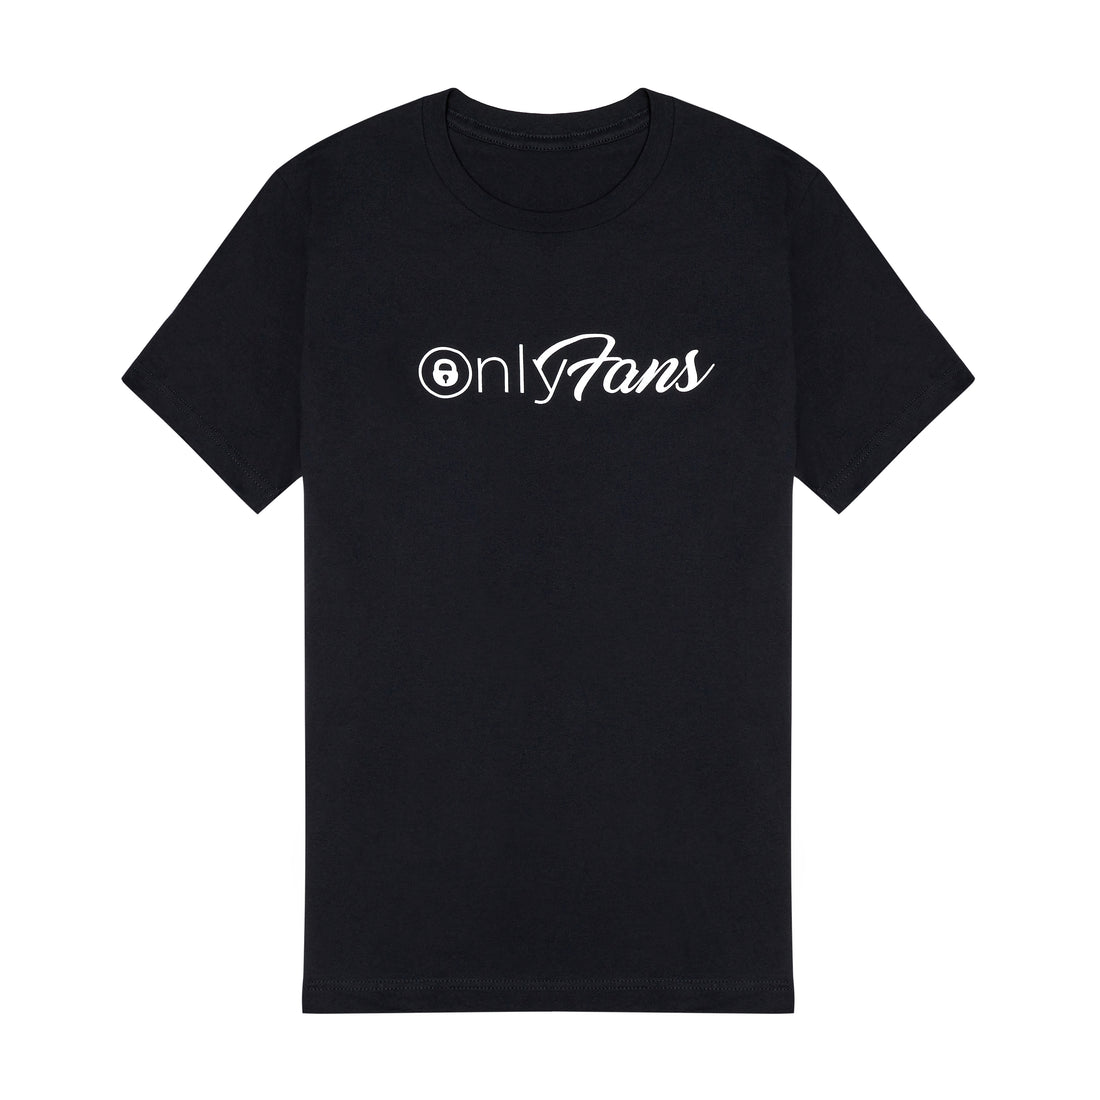 OnlyFans Classic Black Tee